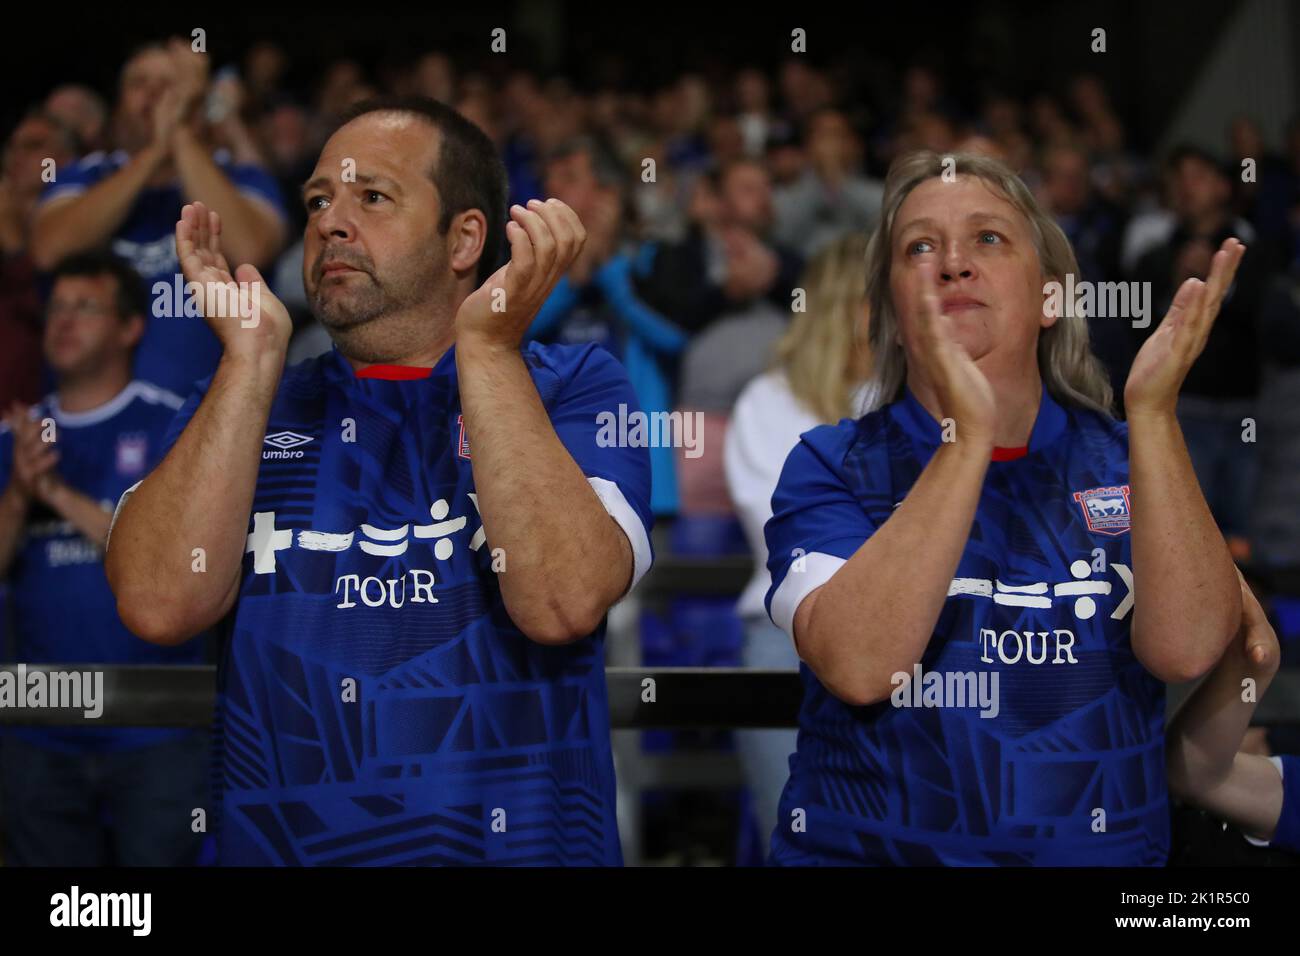 11th minute applause in support of former player Marcus Stewart who recently diagnosed with Motor Neurone Disease (MND) - Ipswich Town v Bristol Rovers, Sky Bet League One, Portman Road, Ipswich, UK - 13th September 2022  Editorial Use Only - DataCo restrictions apply Stock Photo